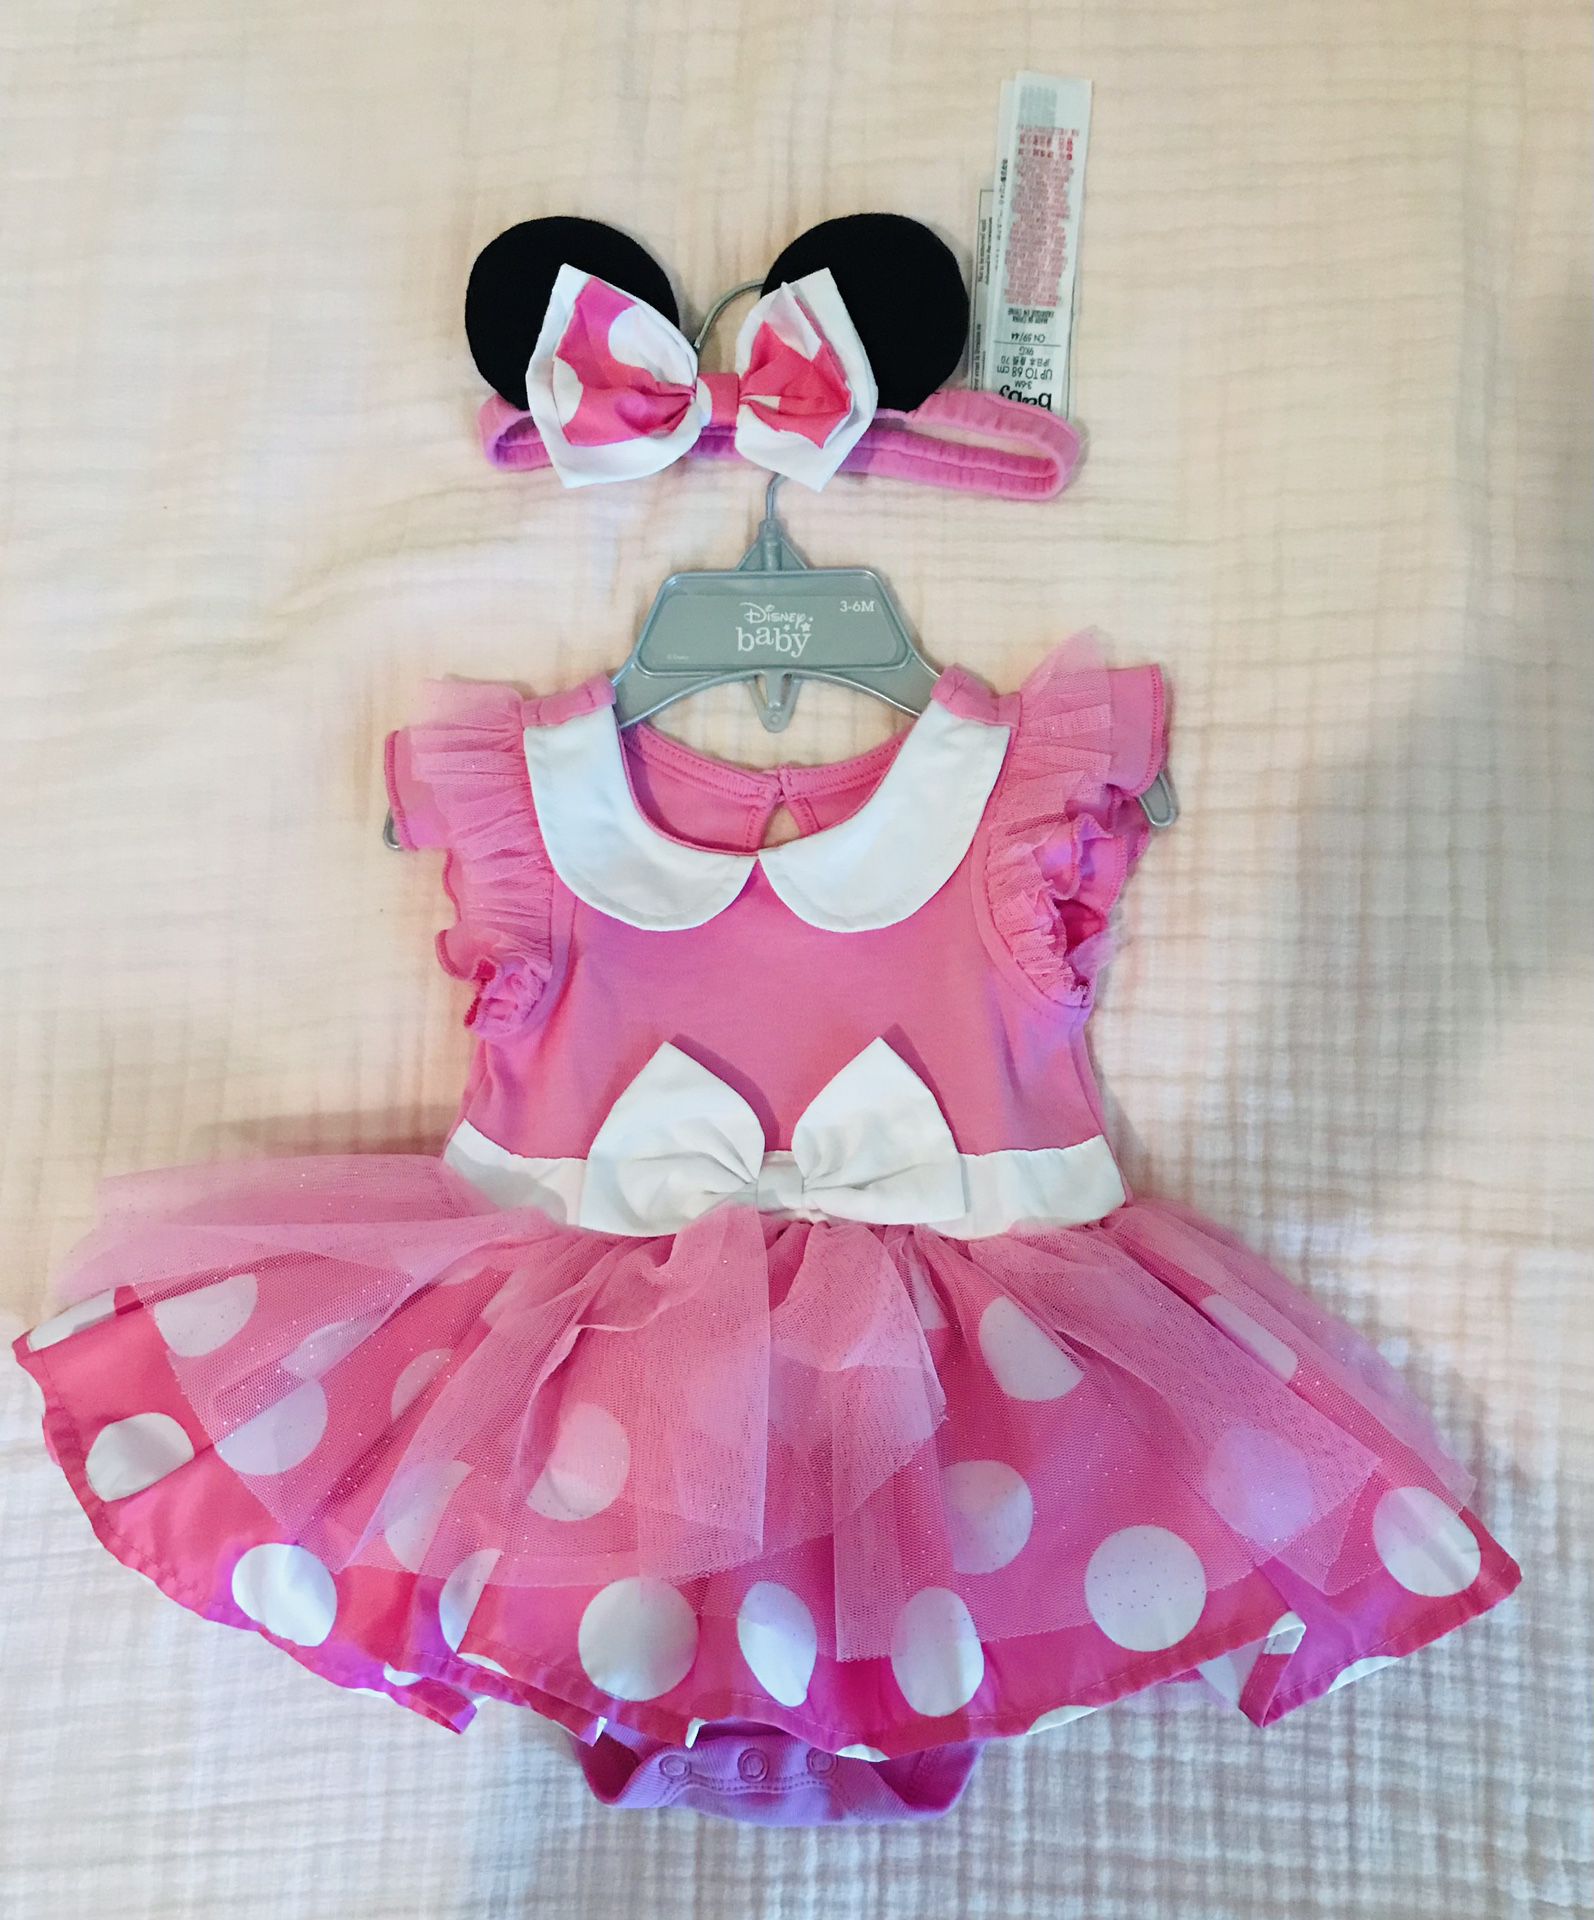 Minnie Mouse Baby Dress Costume